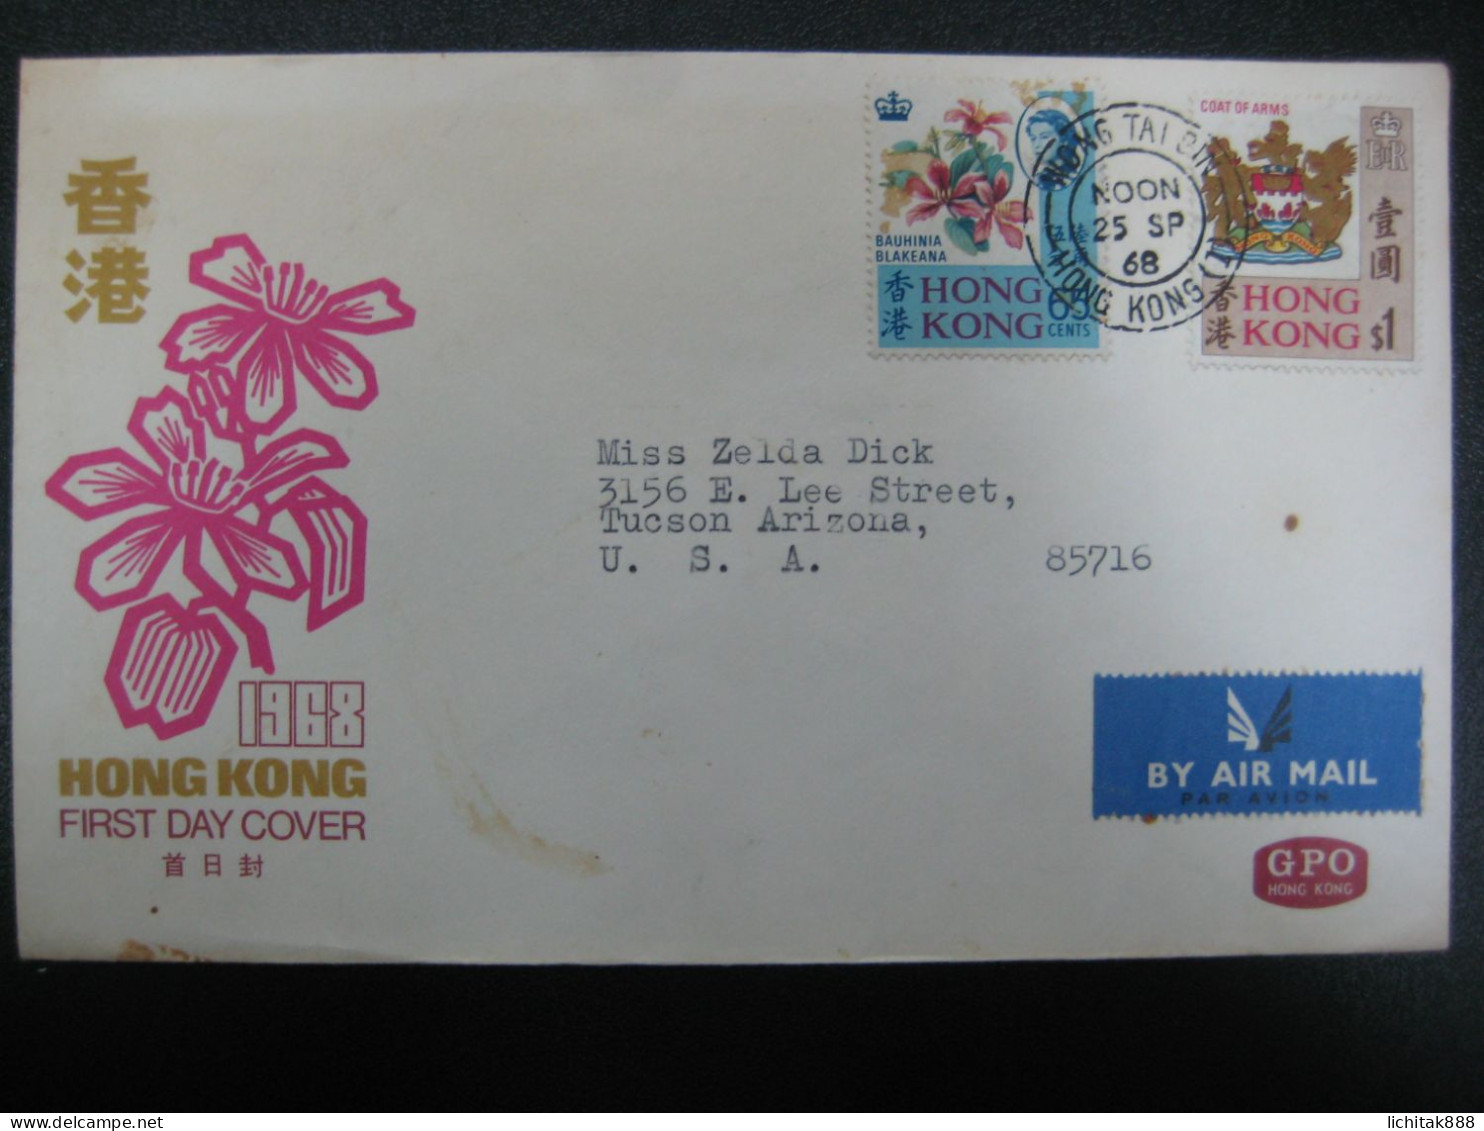 1968 Hong Kong  Bauhinia Blakeana Flower & Coast Of Arms GPO FDC First Day Cover - Storia Postale